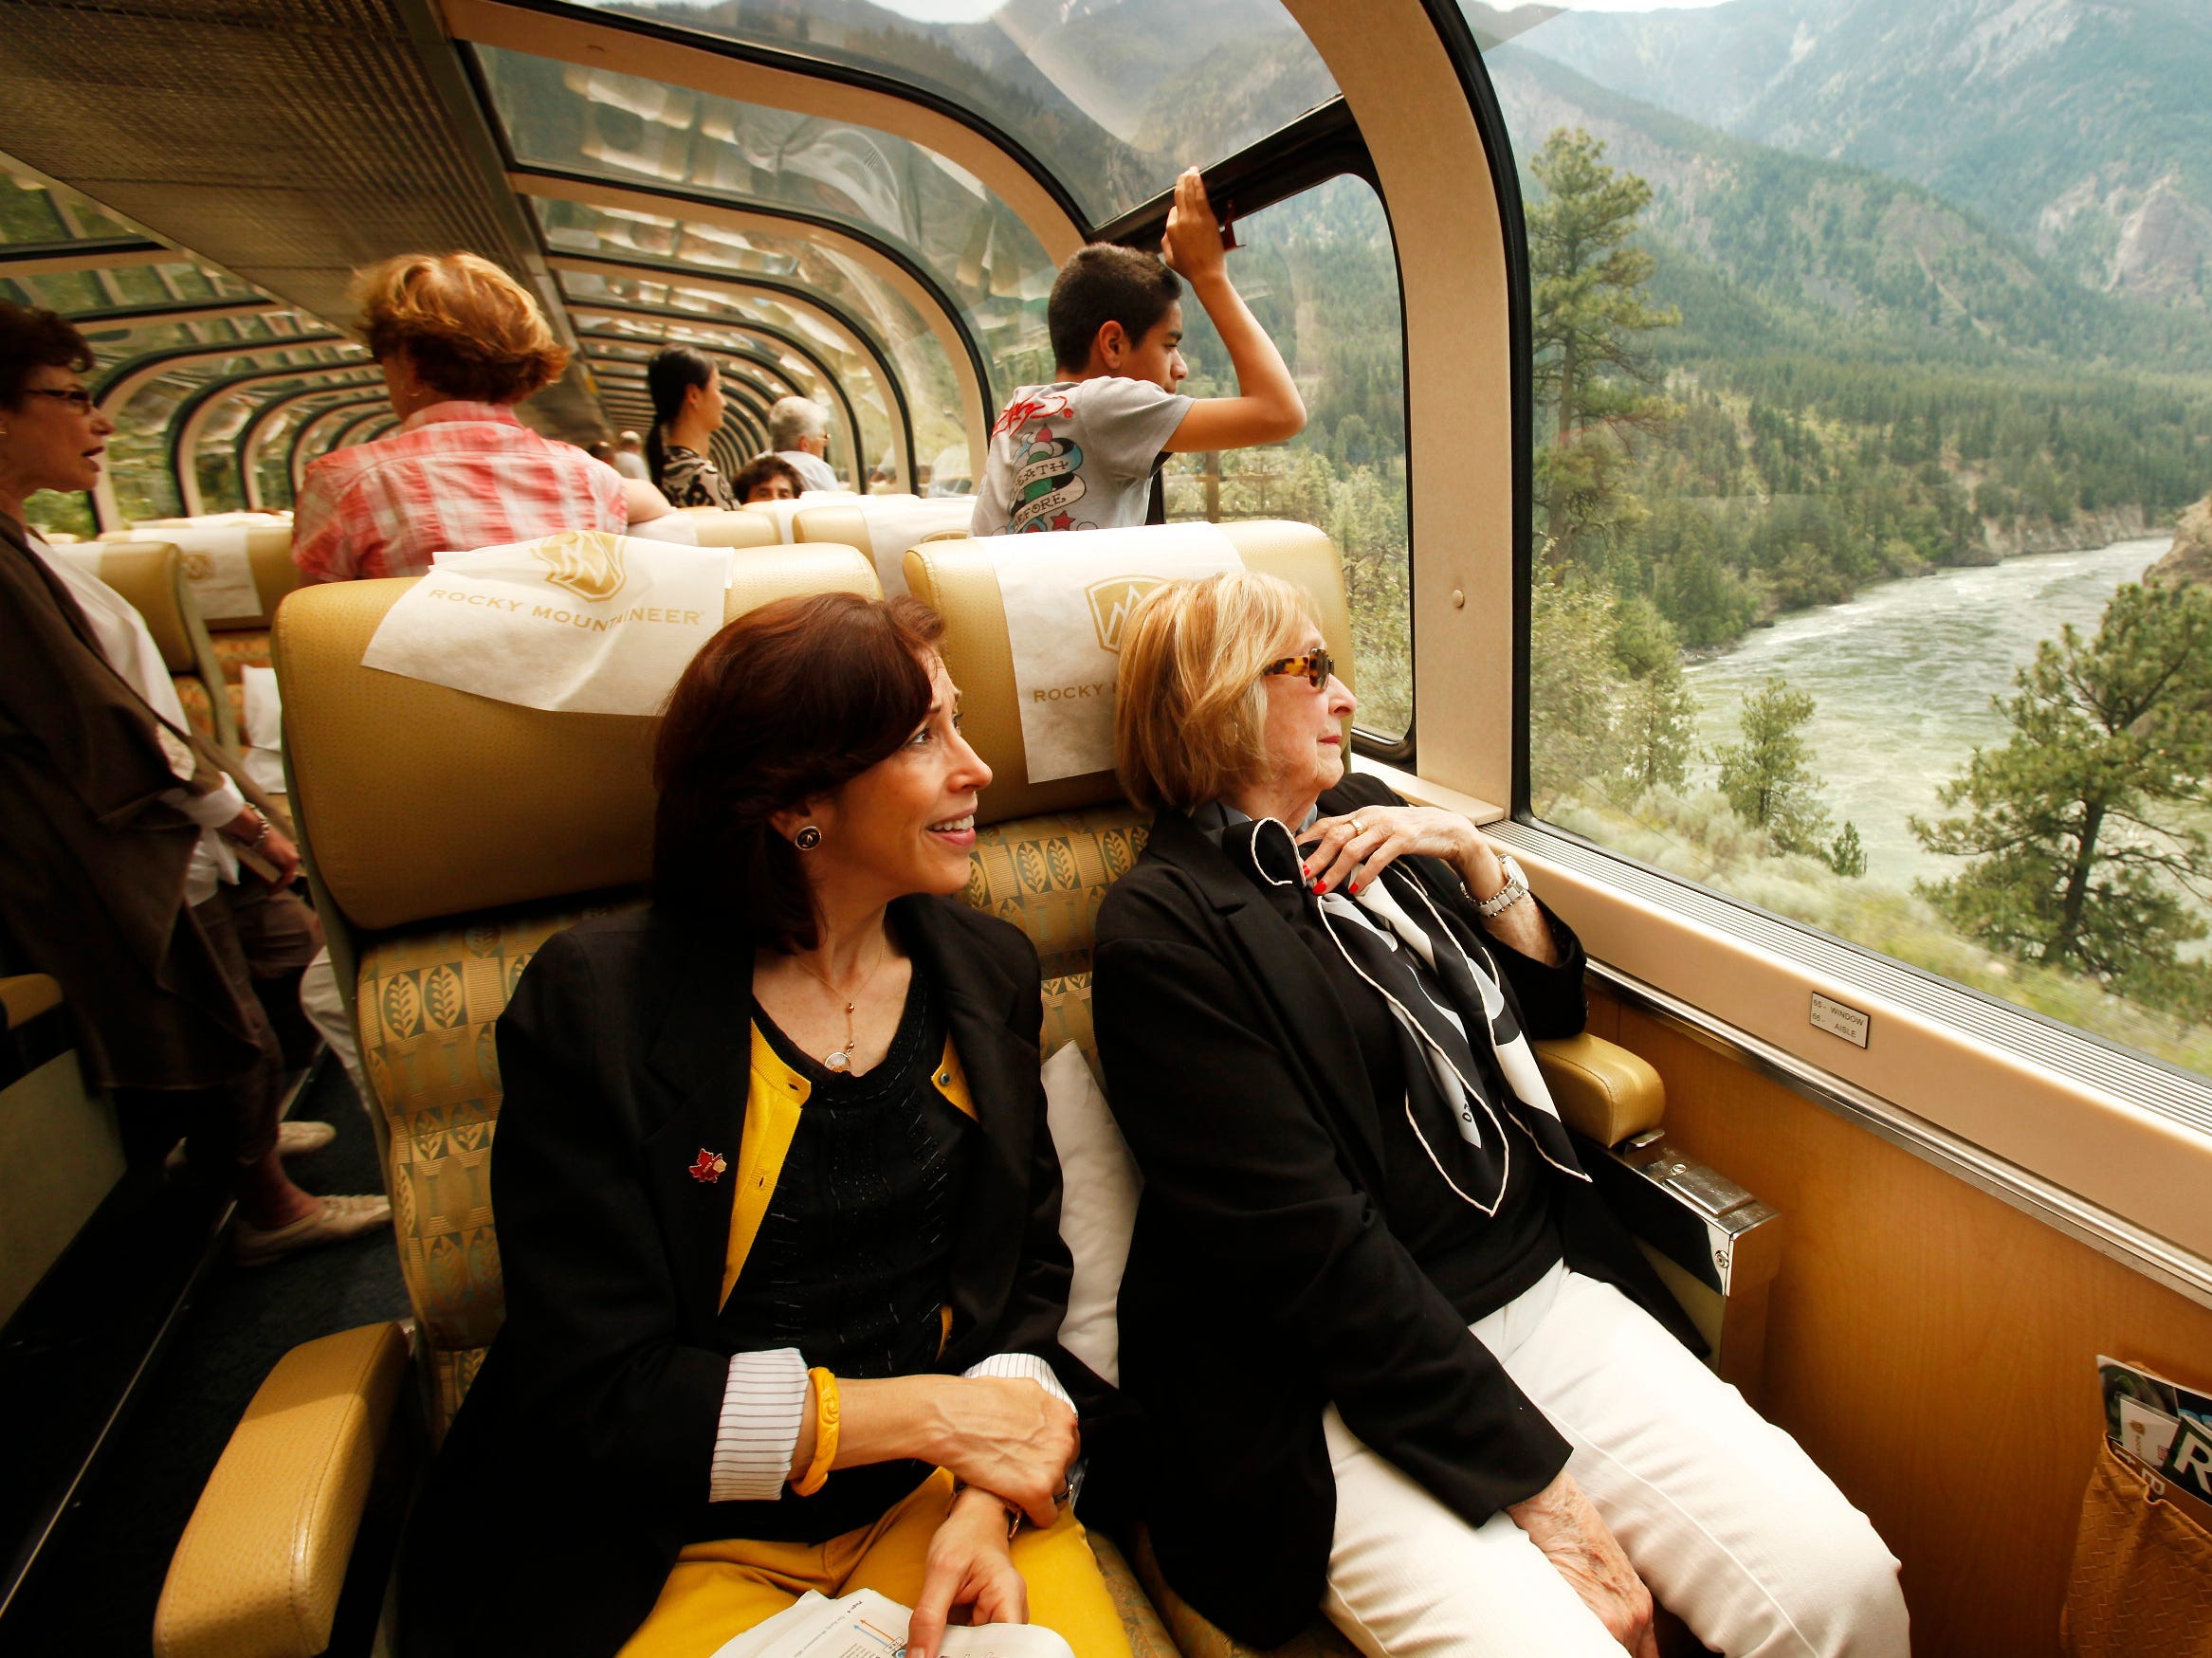 <p>How you get to your destination is another important consideration when trying to travel sustainably, Blotter told Insider. Her top recommendation is to <a href="https://www.insider.com/why-you-shouldnt-book-seat-shared-room-overnight-sleeper-train-2023-8">travel by train</a>, which is better for the planet than flying or driving.</p><p>According to the <a href="https://www.epa.gov/greenvehicles/fast-facts-transportation-greenhouse-gas-emissions" rel="noopener">US Environmental Protection Agency</a>, 29% of greenhouse-gas emissions in 2021 came from transportation — with 2% of those emissions coming from train travel. In comparison, planes were responsible for 9% of transportation emissions, while passenger cars emitted 21%, and larger vehicles like trucks and minivans emitted 37%. </p><p>"Luxury train travel is an option for a reduced carbon footprint with operators such as <a href="https://www.rockymountaineer.com/goldleaf" rel="noopener">Rocky Mountaineer</a>," Blotter said, adding that the train serves gourmet meals prepared by executive chefs. The train also has two levels of glass domes for striking views of the passing landscape. </p><p>Insider's Monica Humphries <a href="https://www.insider.com/rocky-mountaineer-train-travel-what-to-know-us-photos-2022-8">traveled on the Rocky Mountaineer</a> from Denver to Moab, Utah, in 2022. Humphries enjoyed the stellar scenery, food, and drink aboard the luxury train, and said historical facts about the route kept her entertained on the two-day journey.</p>